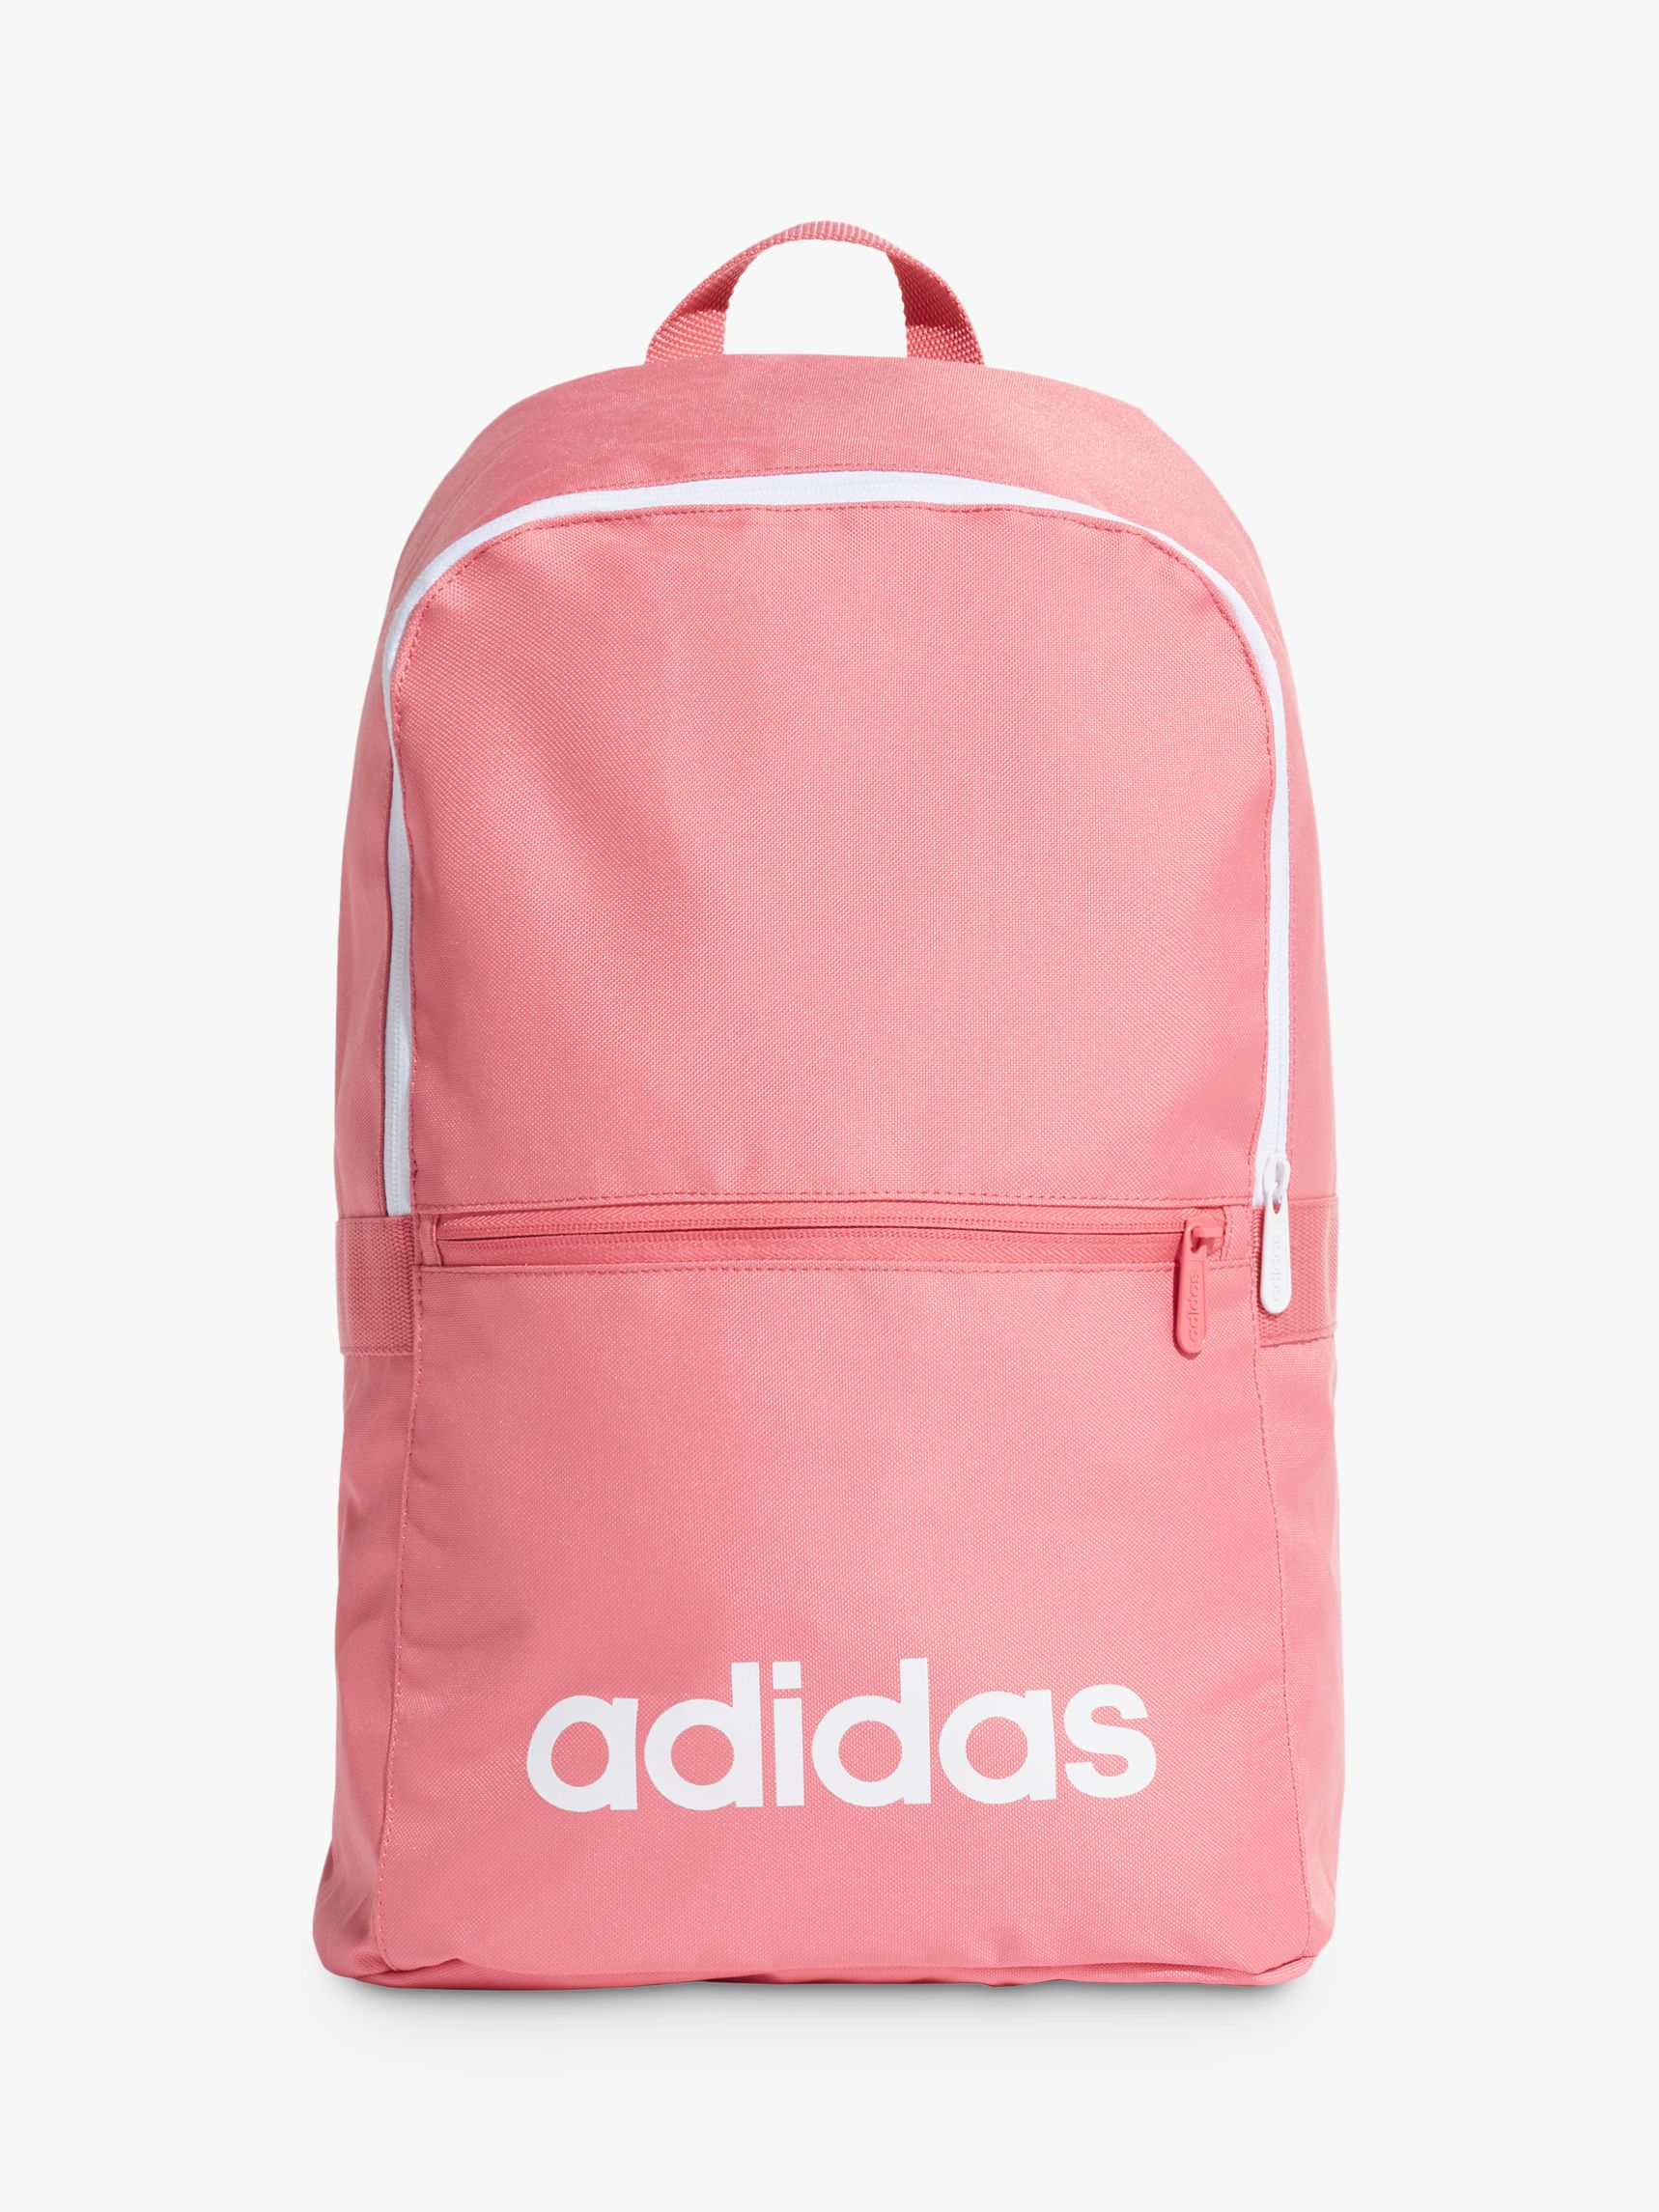 adidas Linear Classic Daily Backpack, Bliss Pink at John Lewis & Partners